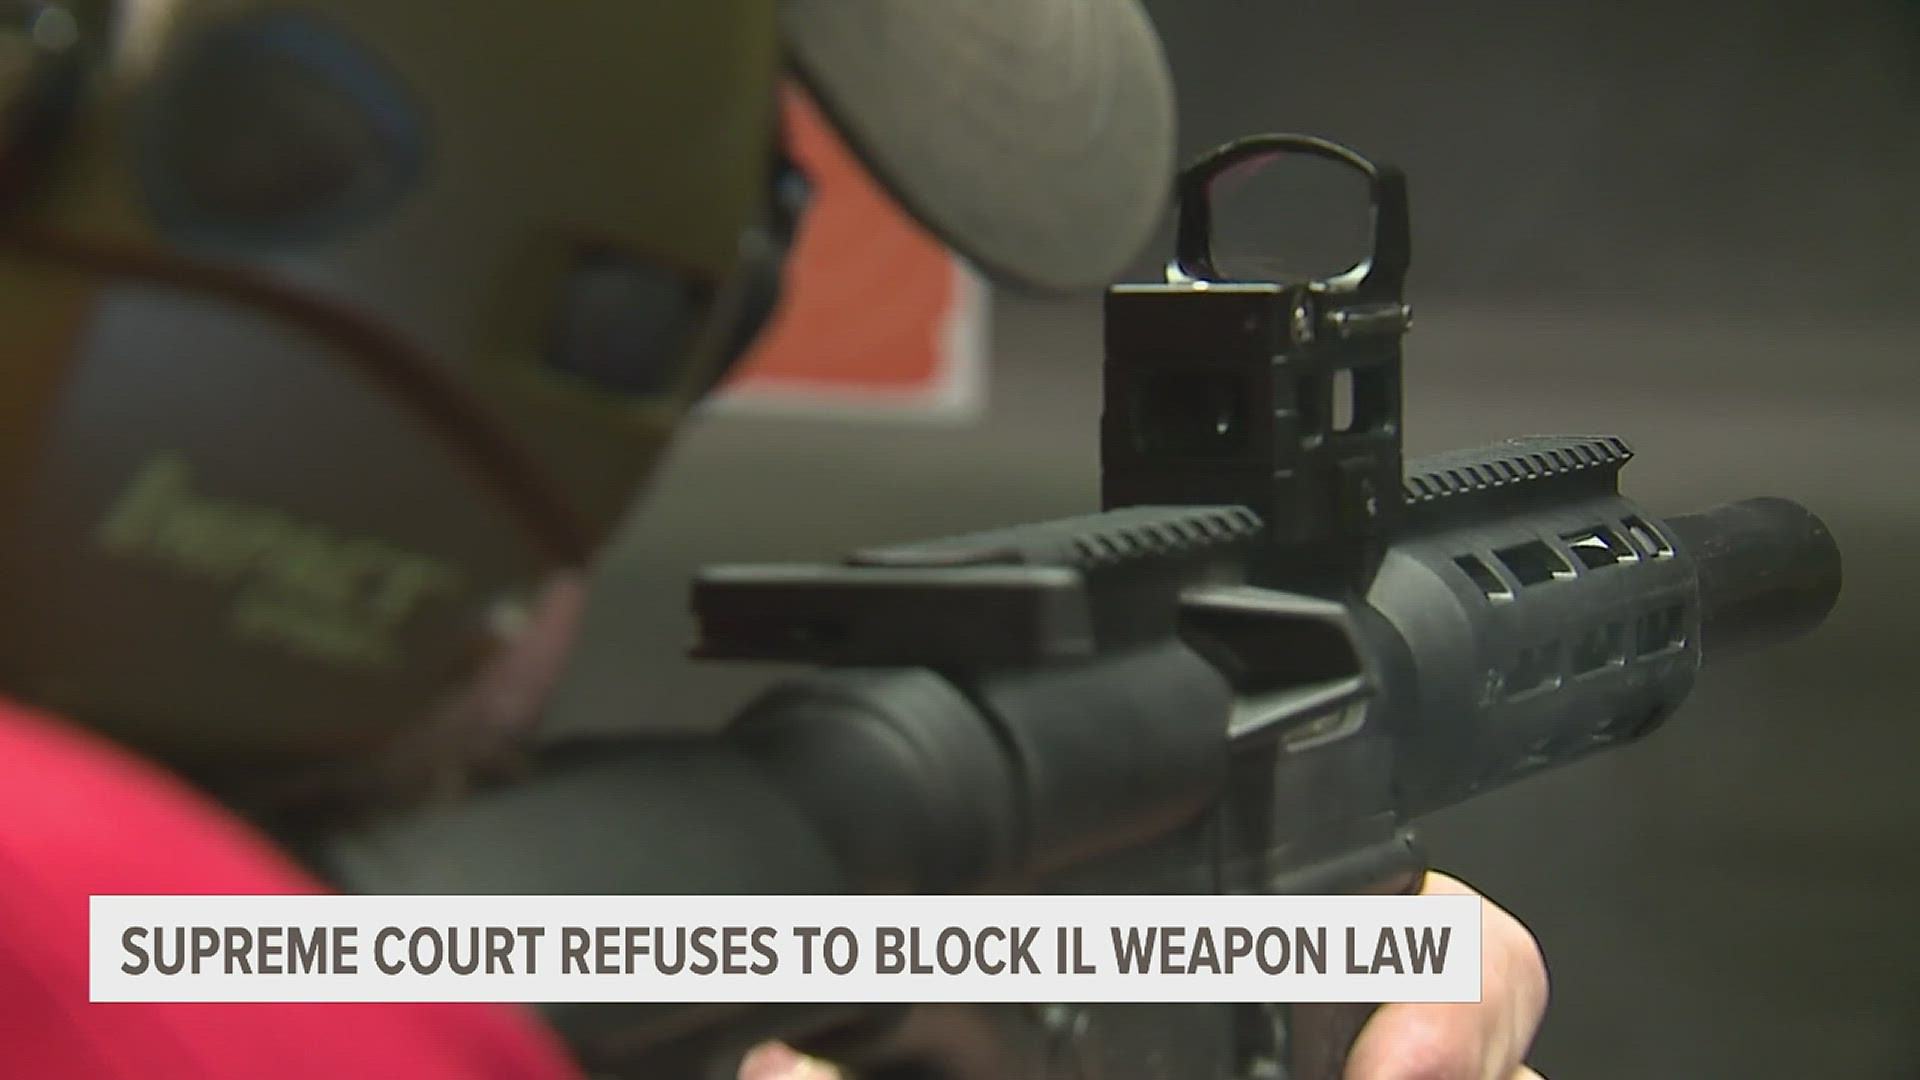 The Supreme Court refuses to block an Illinois law banning some high-power  semiautomatic weapons –